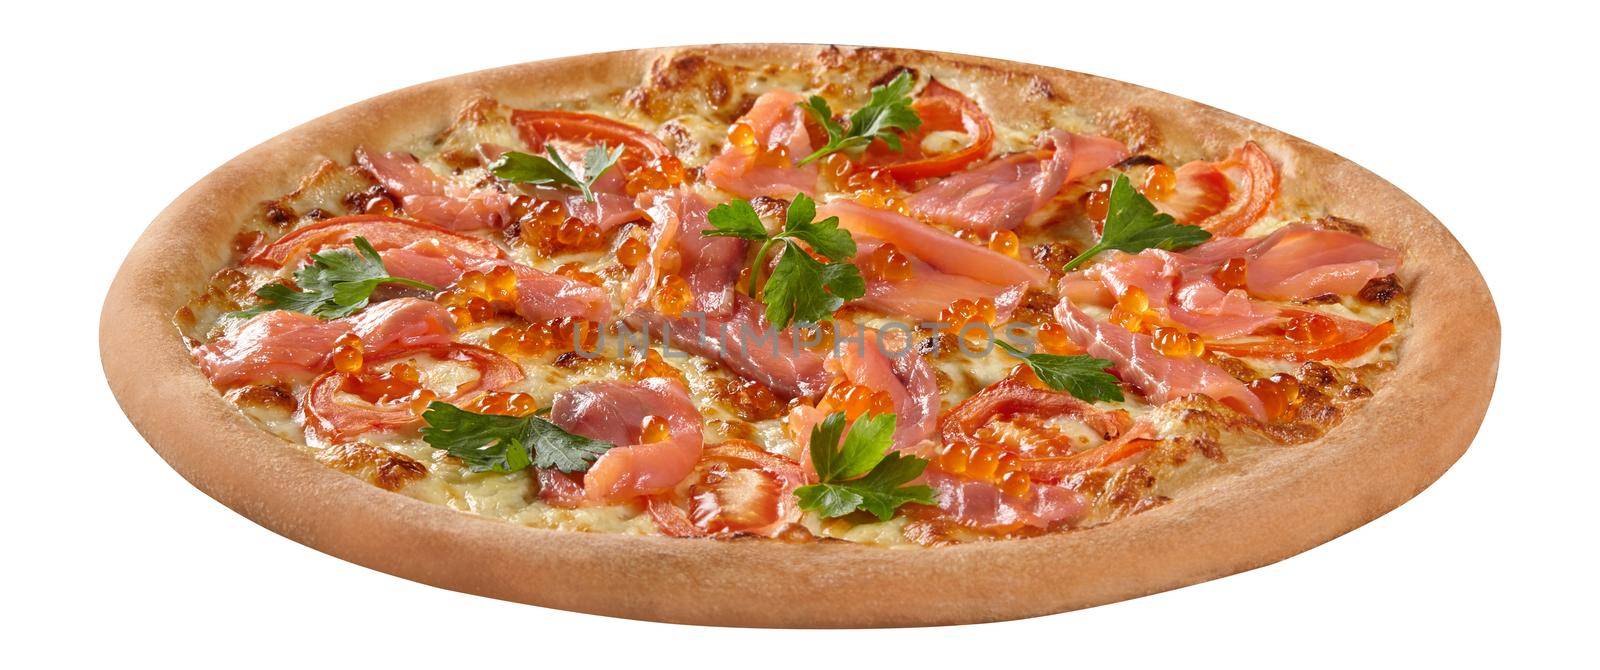 Closeup of thin slices of smoked salmon and red caviar on top of freshly baked pizza with cream cheese sauce, melted mozzarella and tomatoes garnished with fresh parsley. Delicious Italian snack